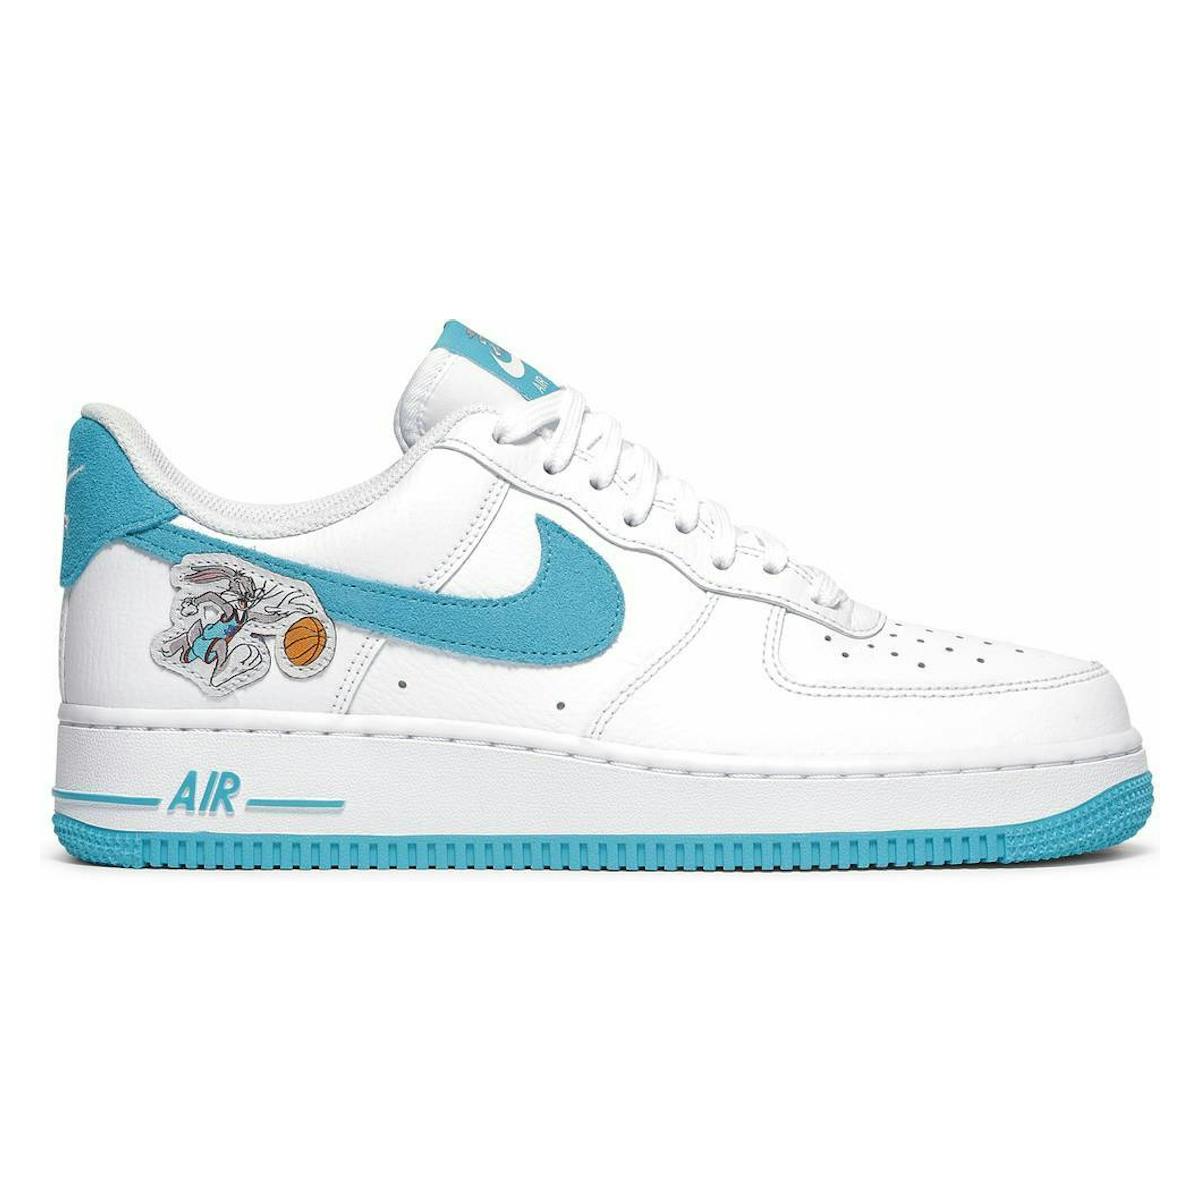 Space Jam x Nike Air Force 1 "Hare"